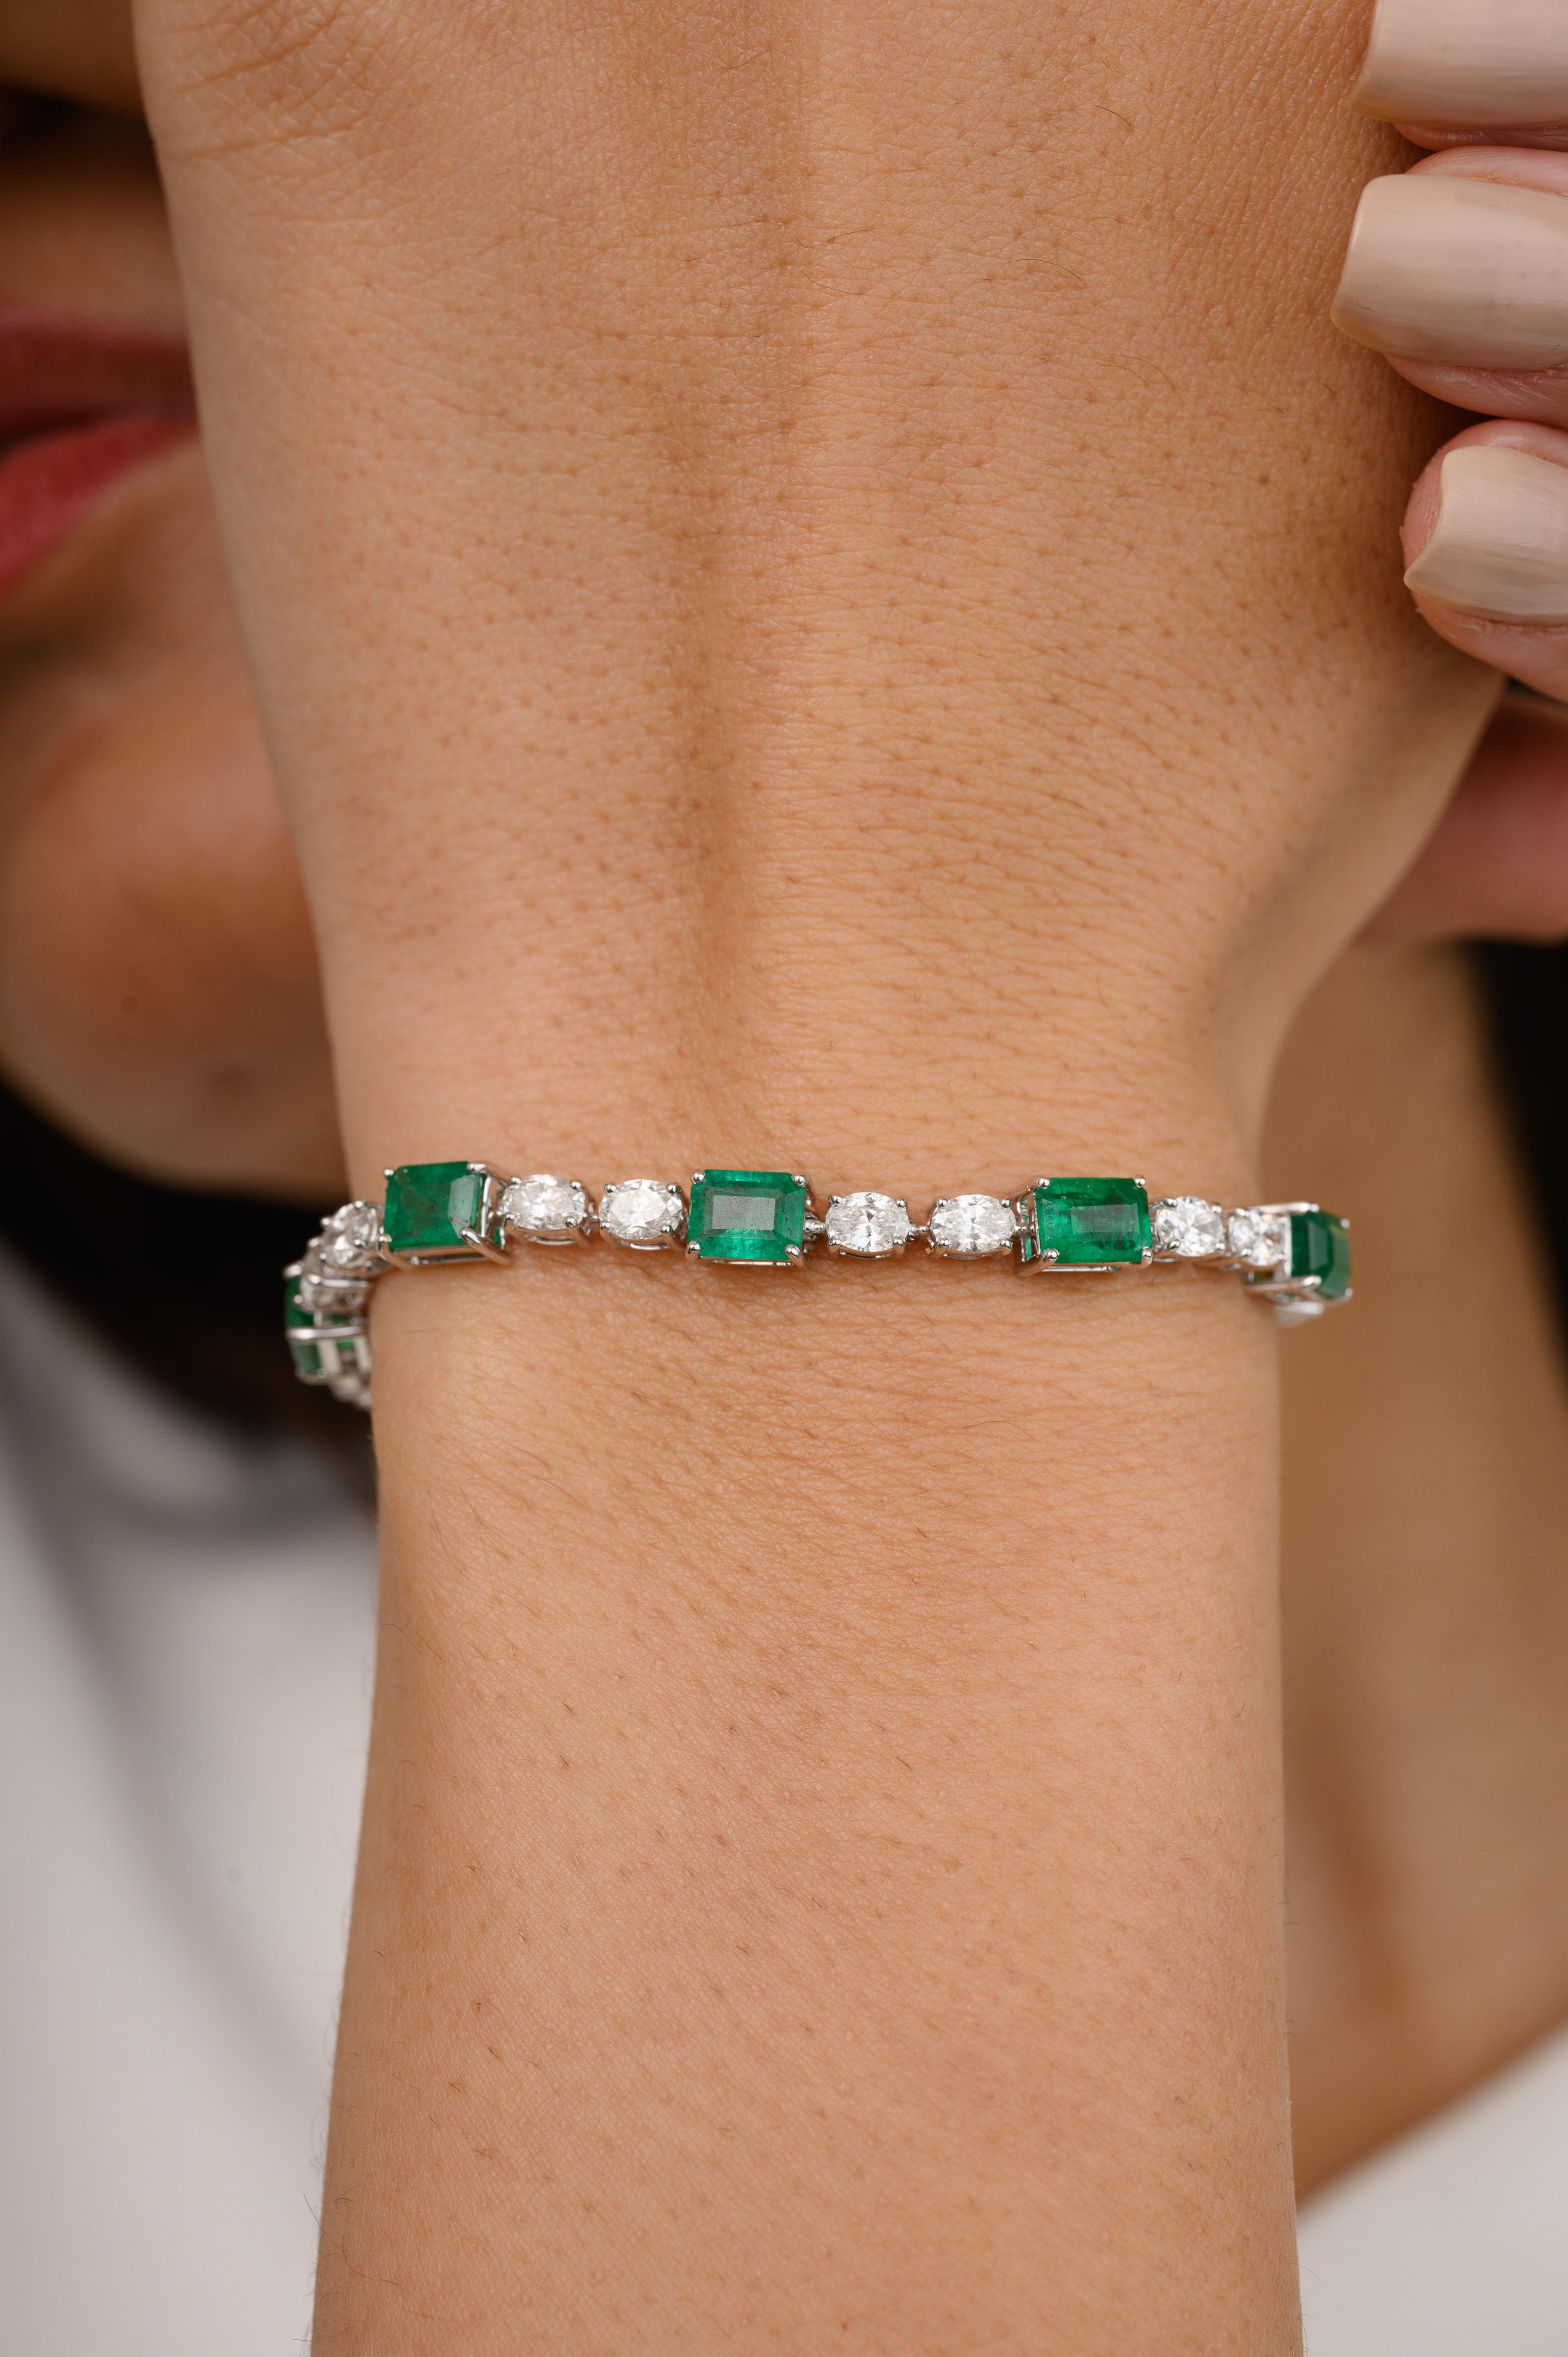 This Exquisite Emerald Diamond Tennis Bracelet for Wedding in 18K gold showcases endlessly sparkling natural emerald, weighing 4.11 carat and diamonds weighing 2.24 carats. It measures 6.5 inches long in length. 
Emerald enhances intellectual